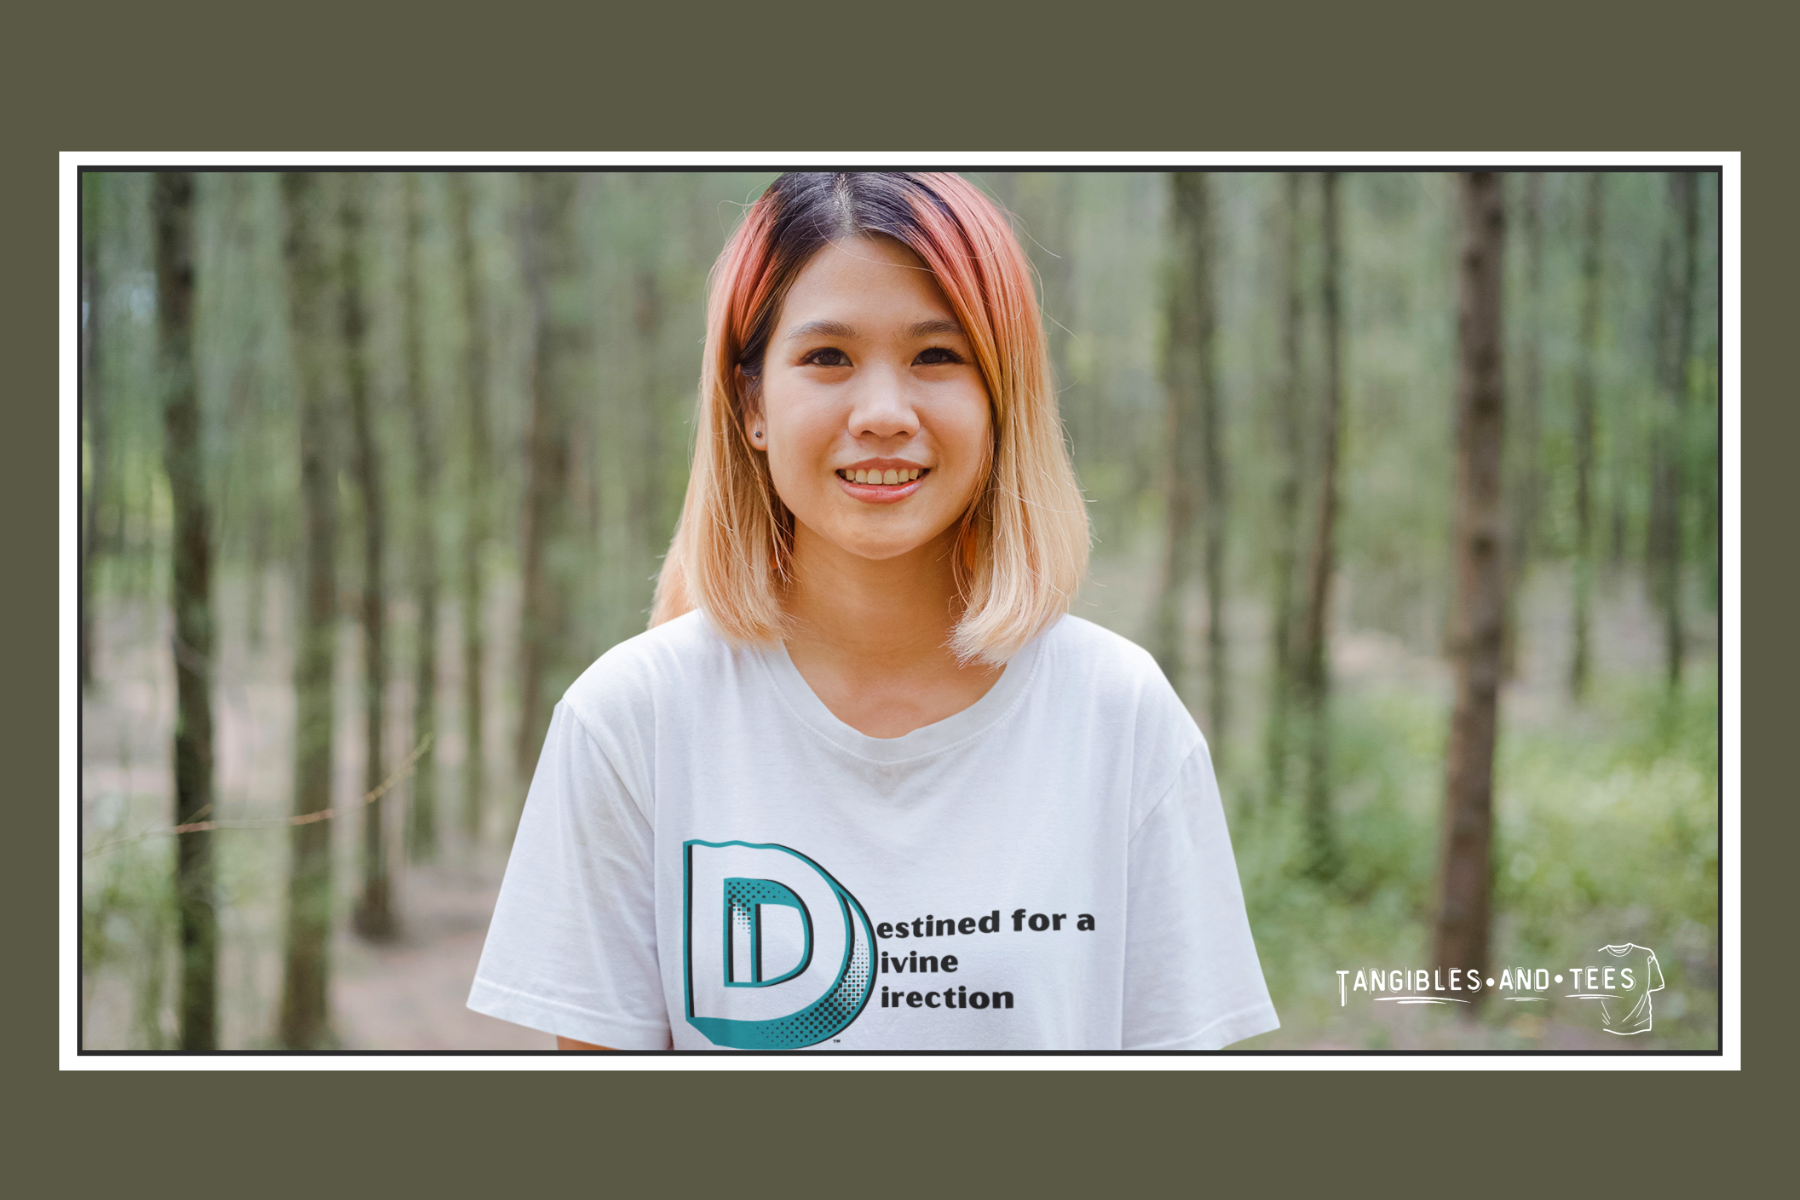 42-oversized-t-shirt-mockup-of-a-young-woman-with-dyed-hair-in-the-fores